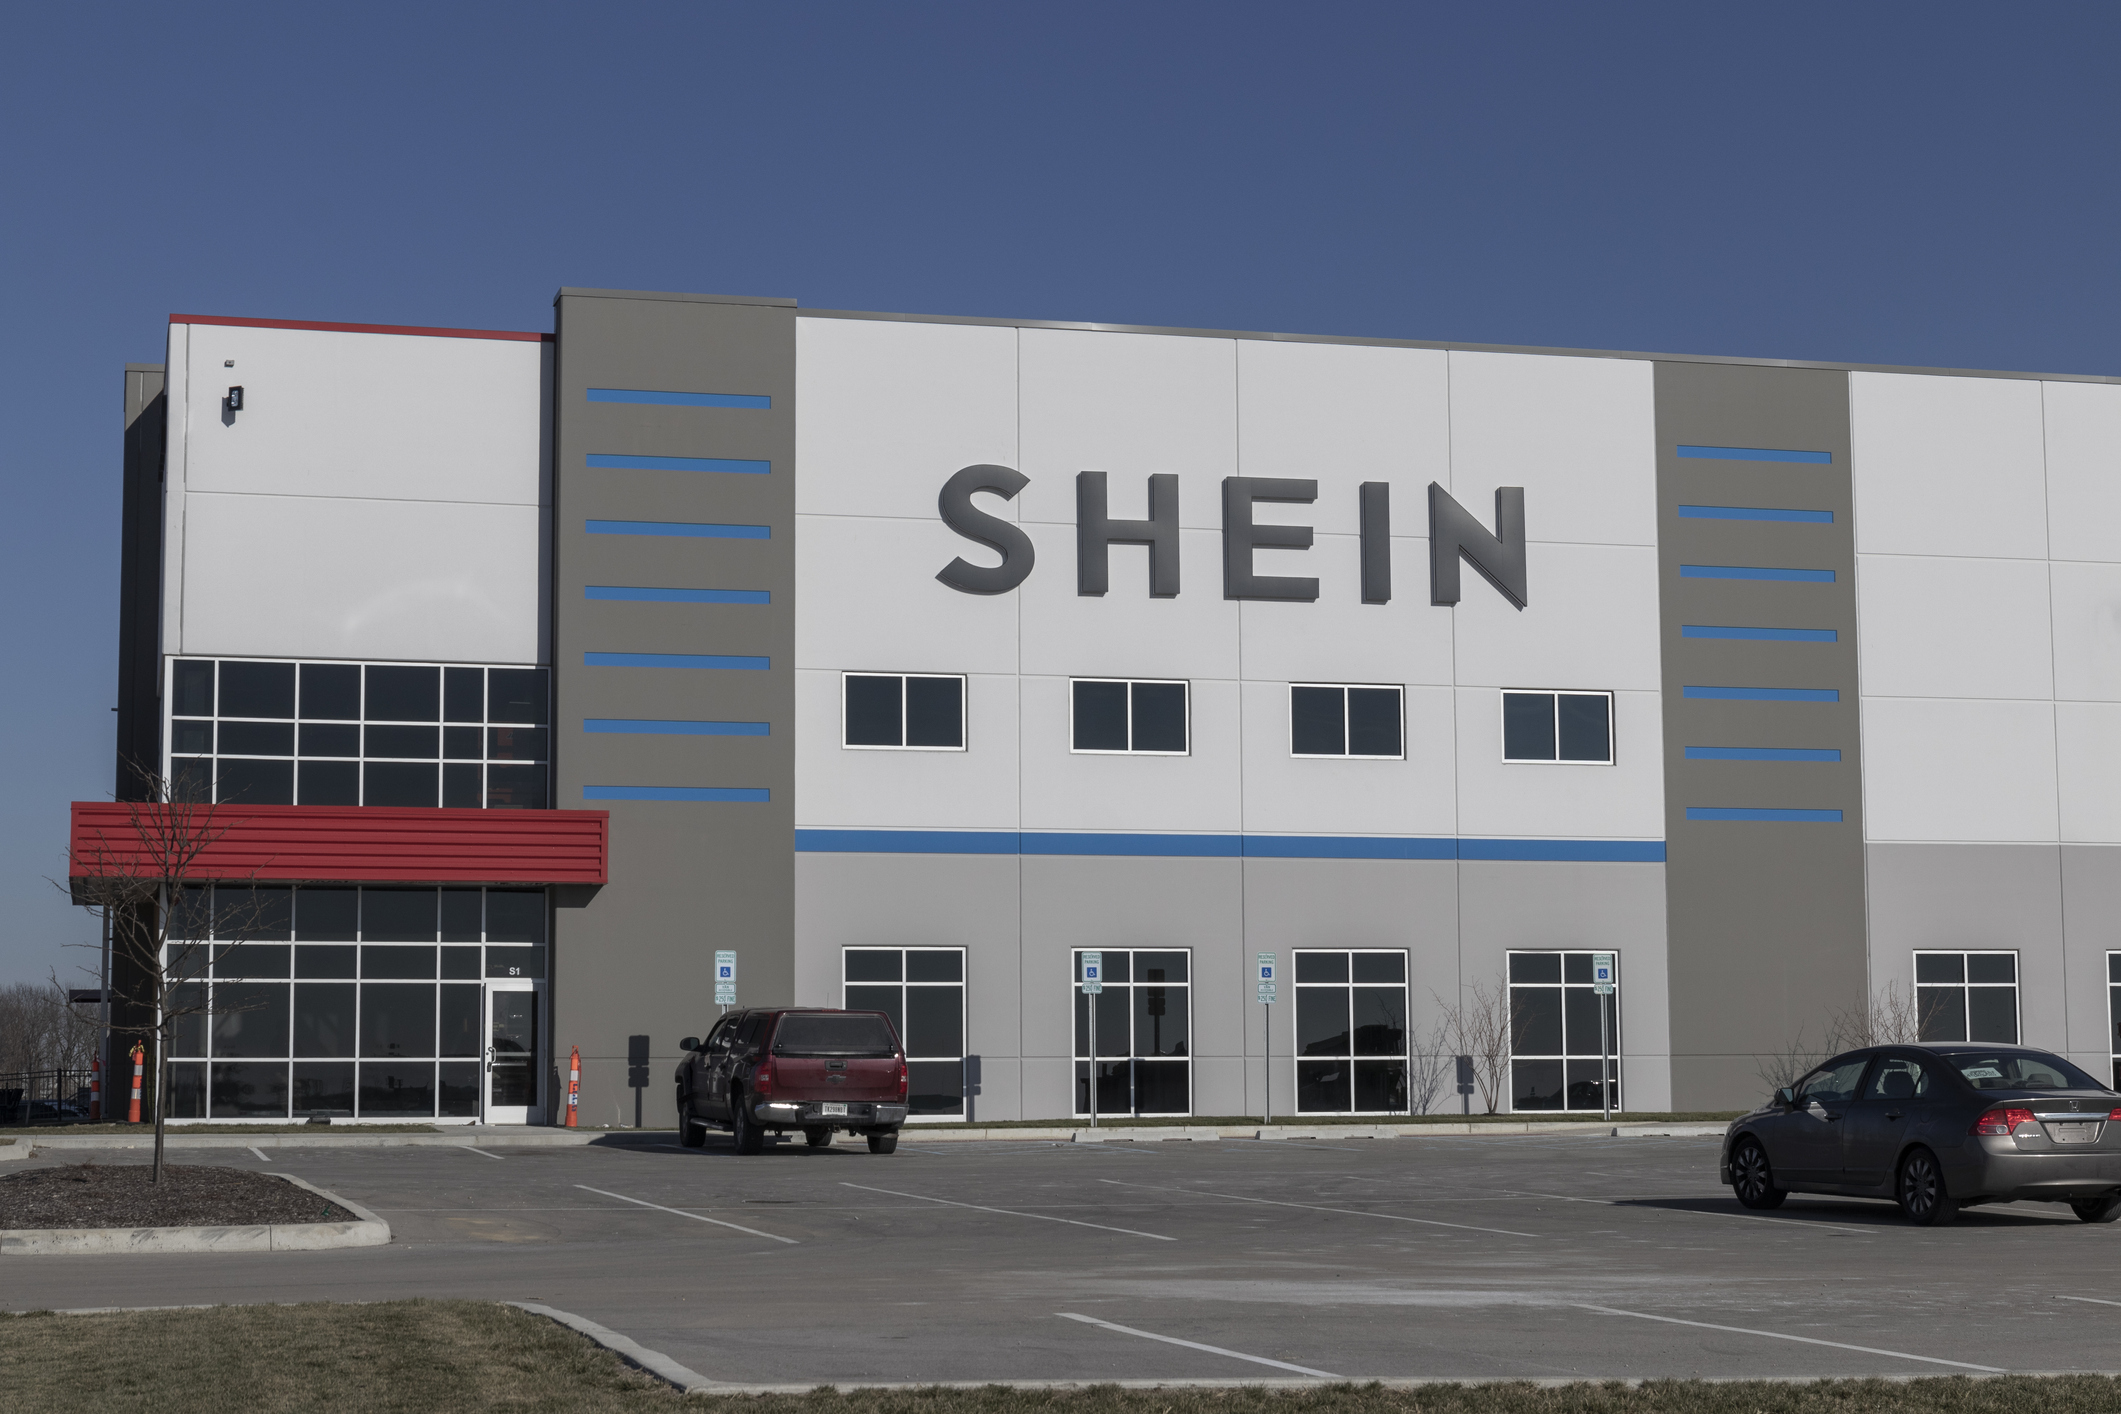 Building with "SHEIN" on the front